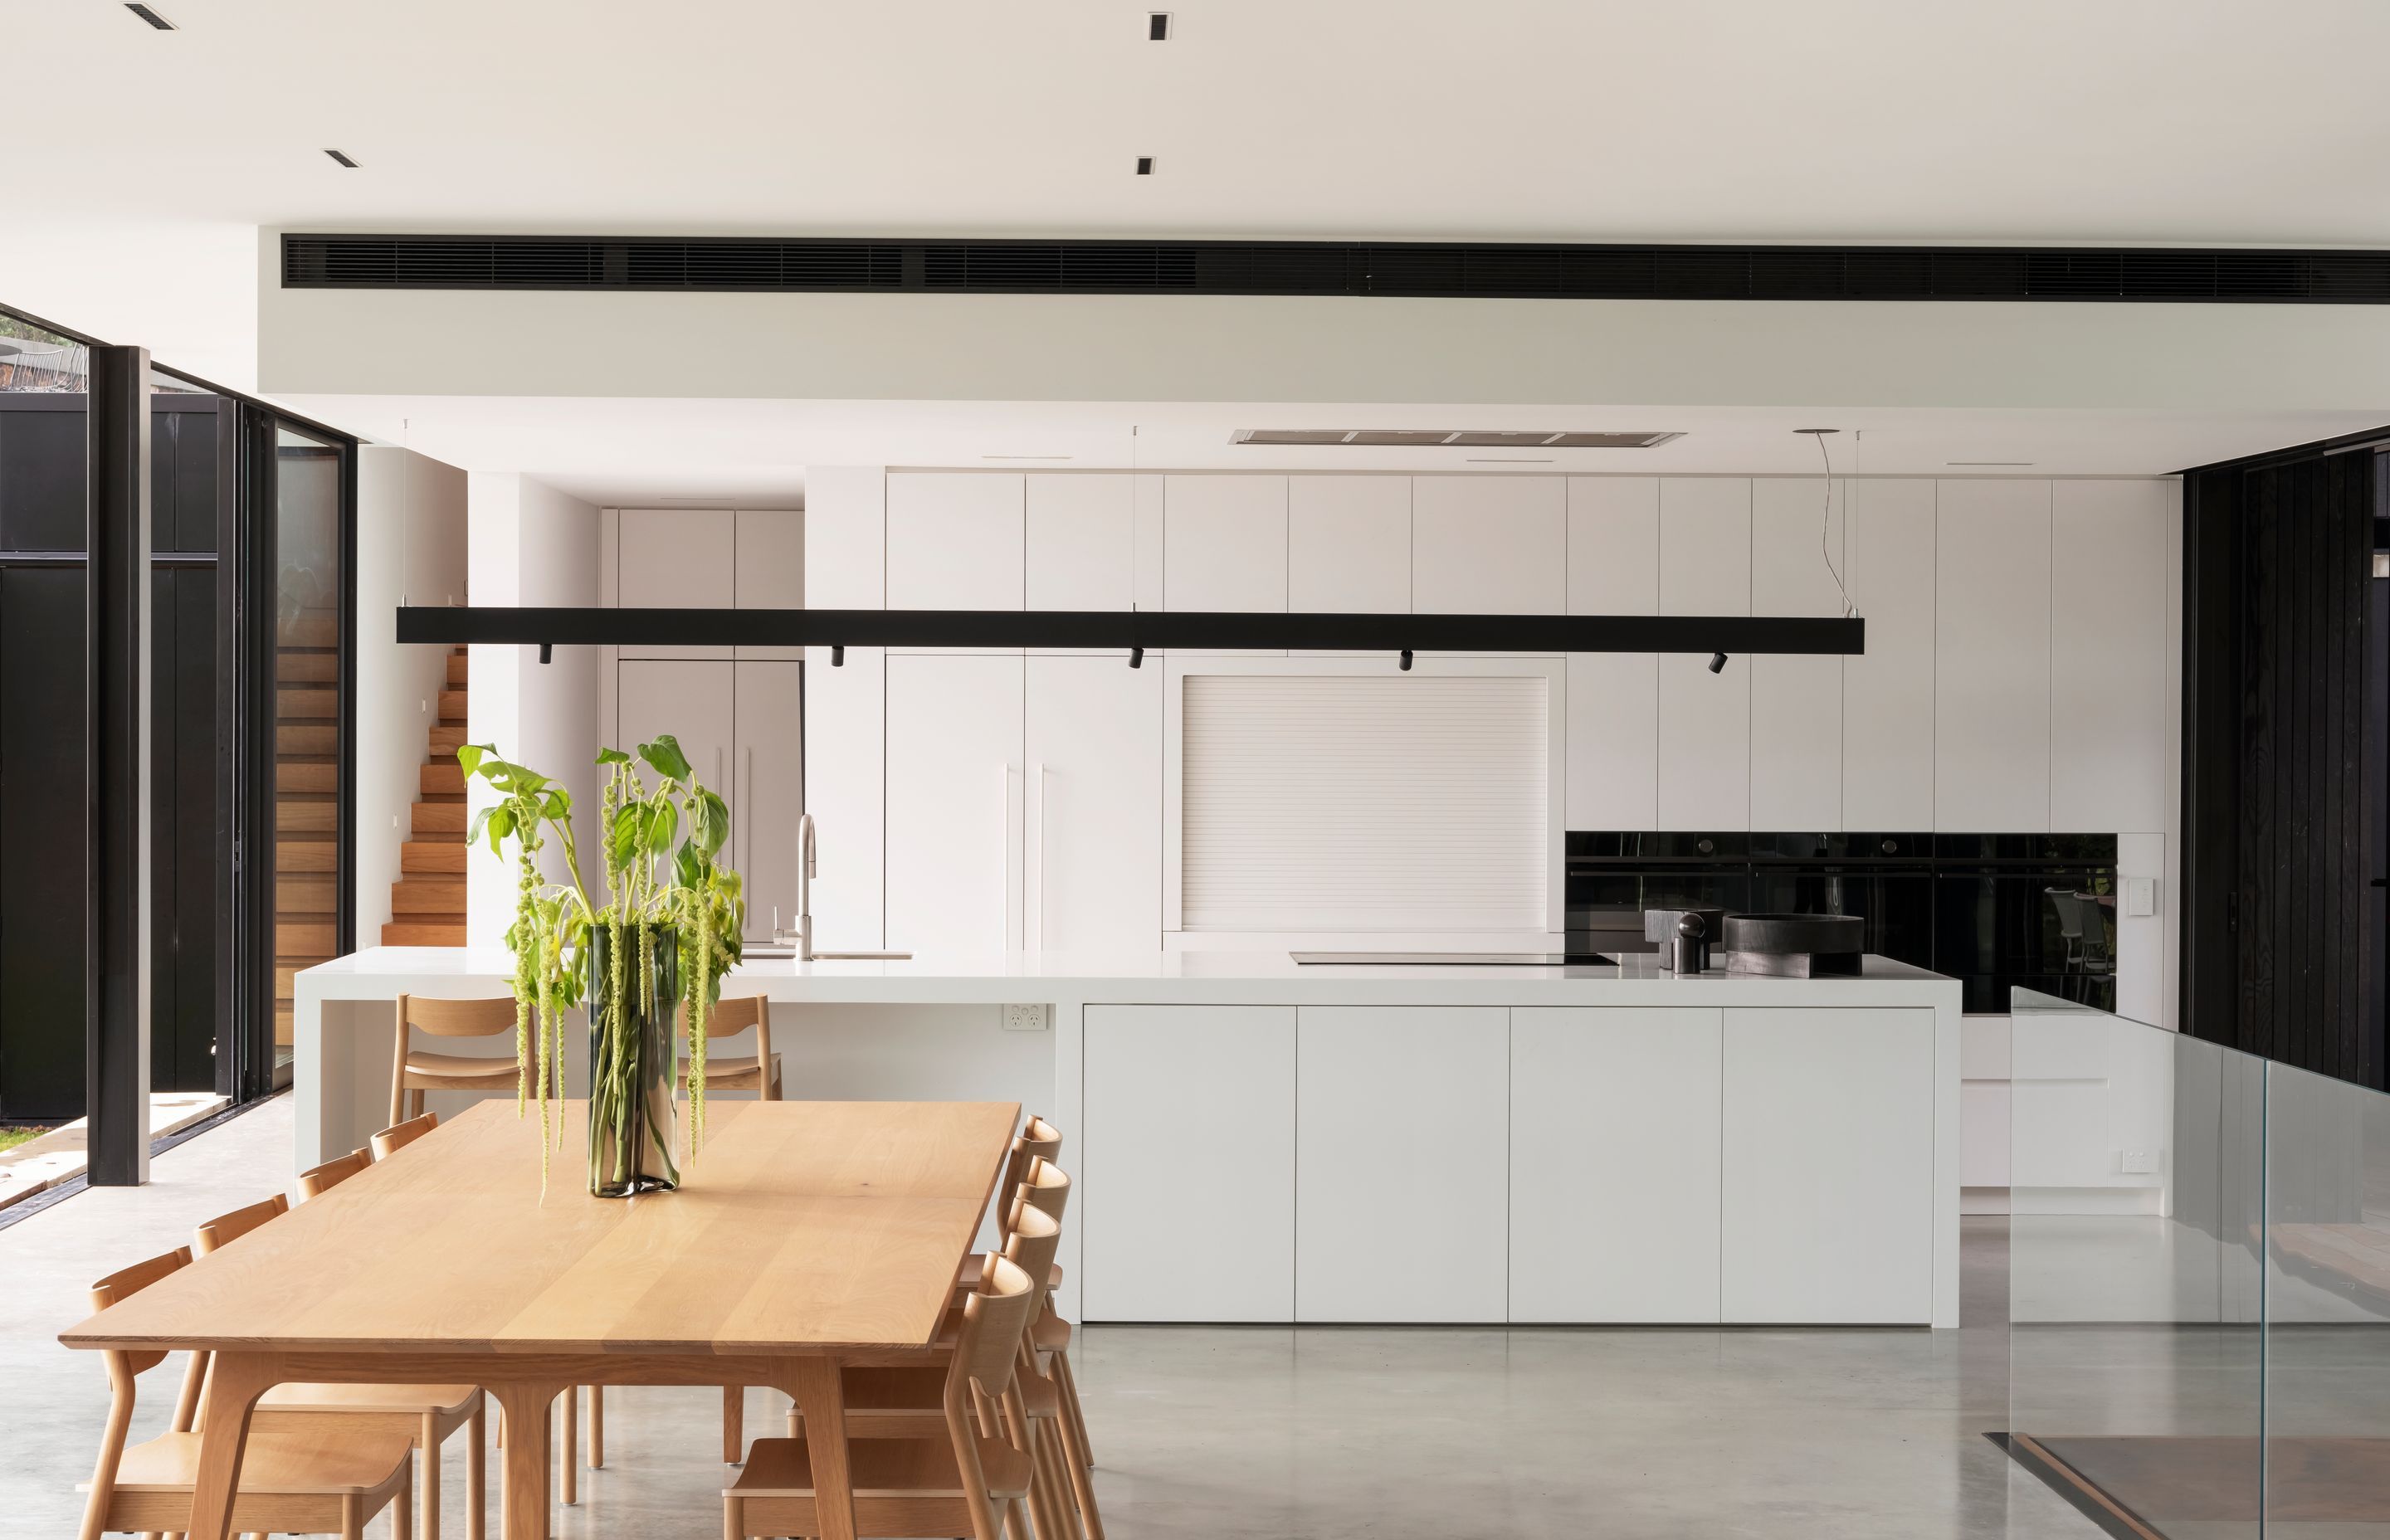 The collaboration between modern and natural lifestyle designed throughout the open plan of kitchen, living and dining.